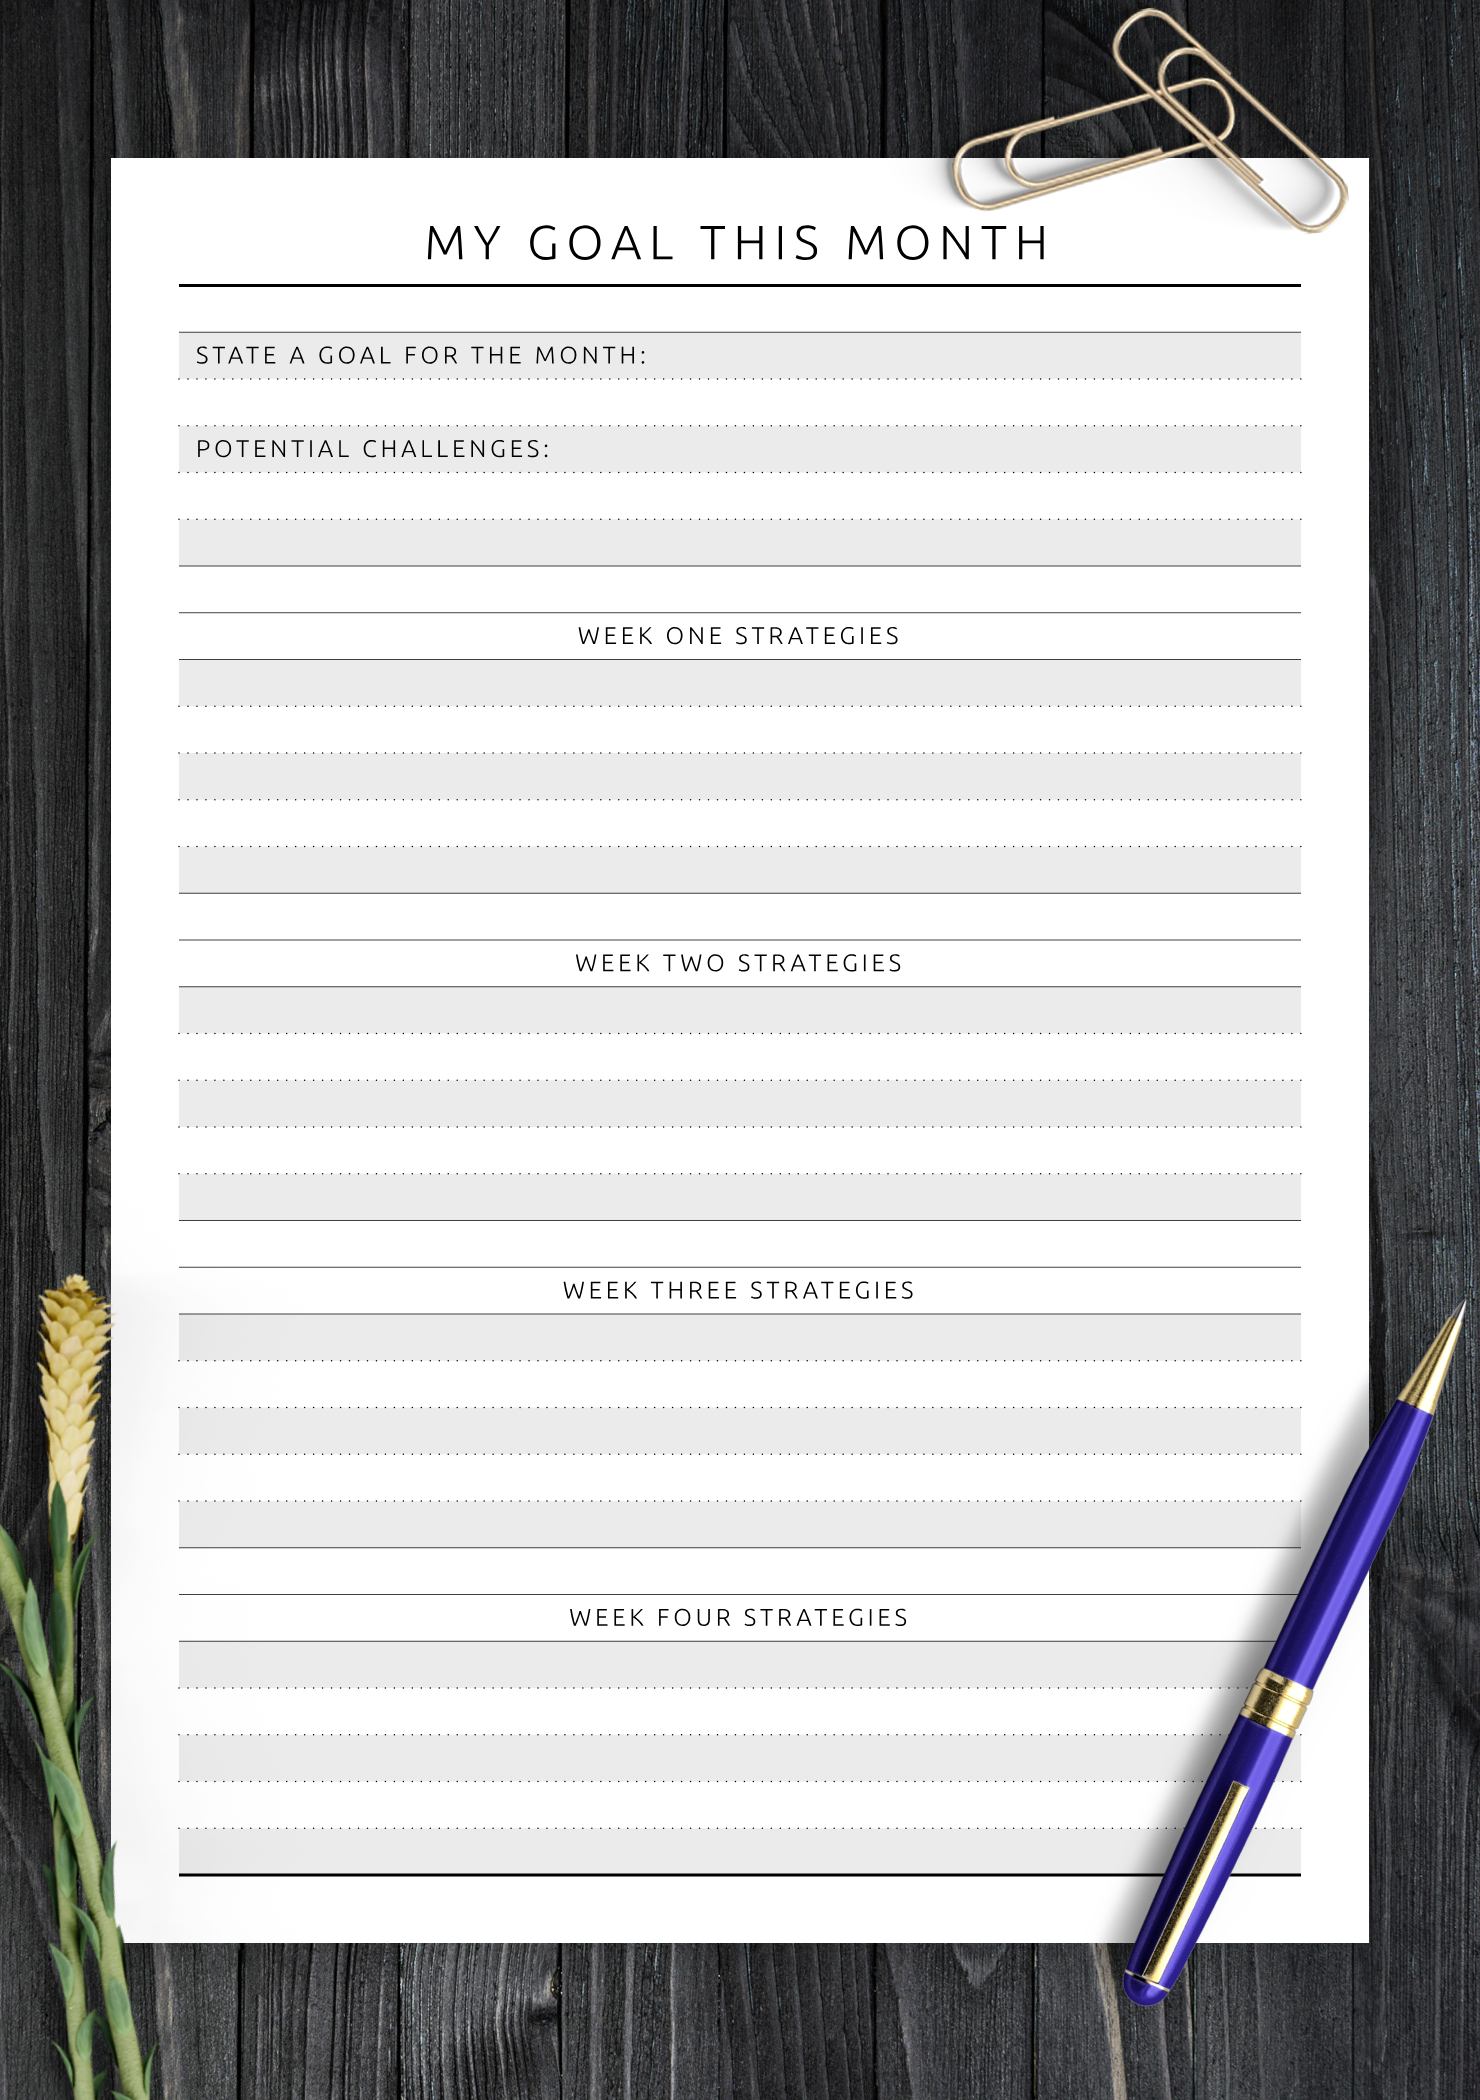 Download Printable My Goal This Month with Weekly Strategies PDF